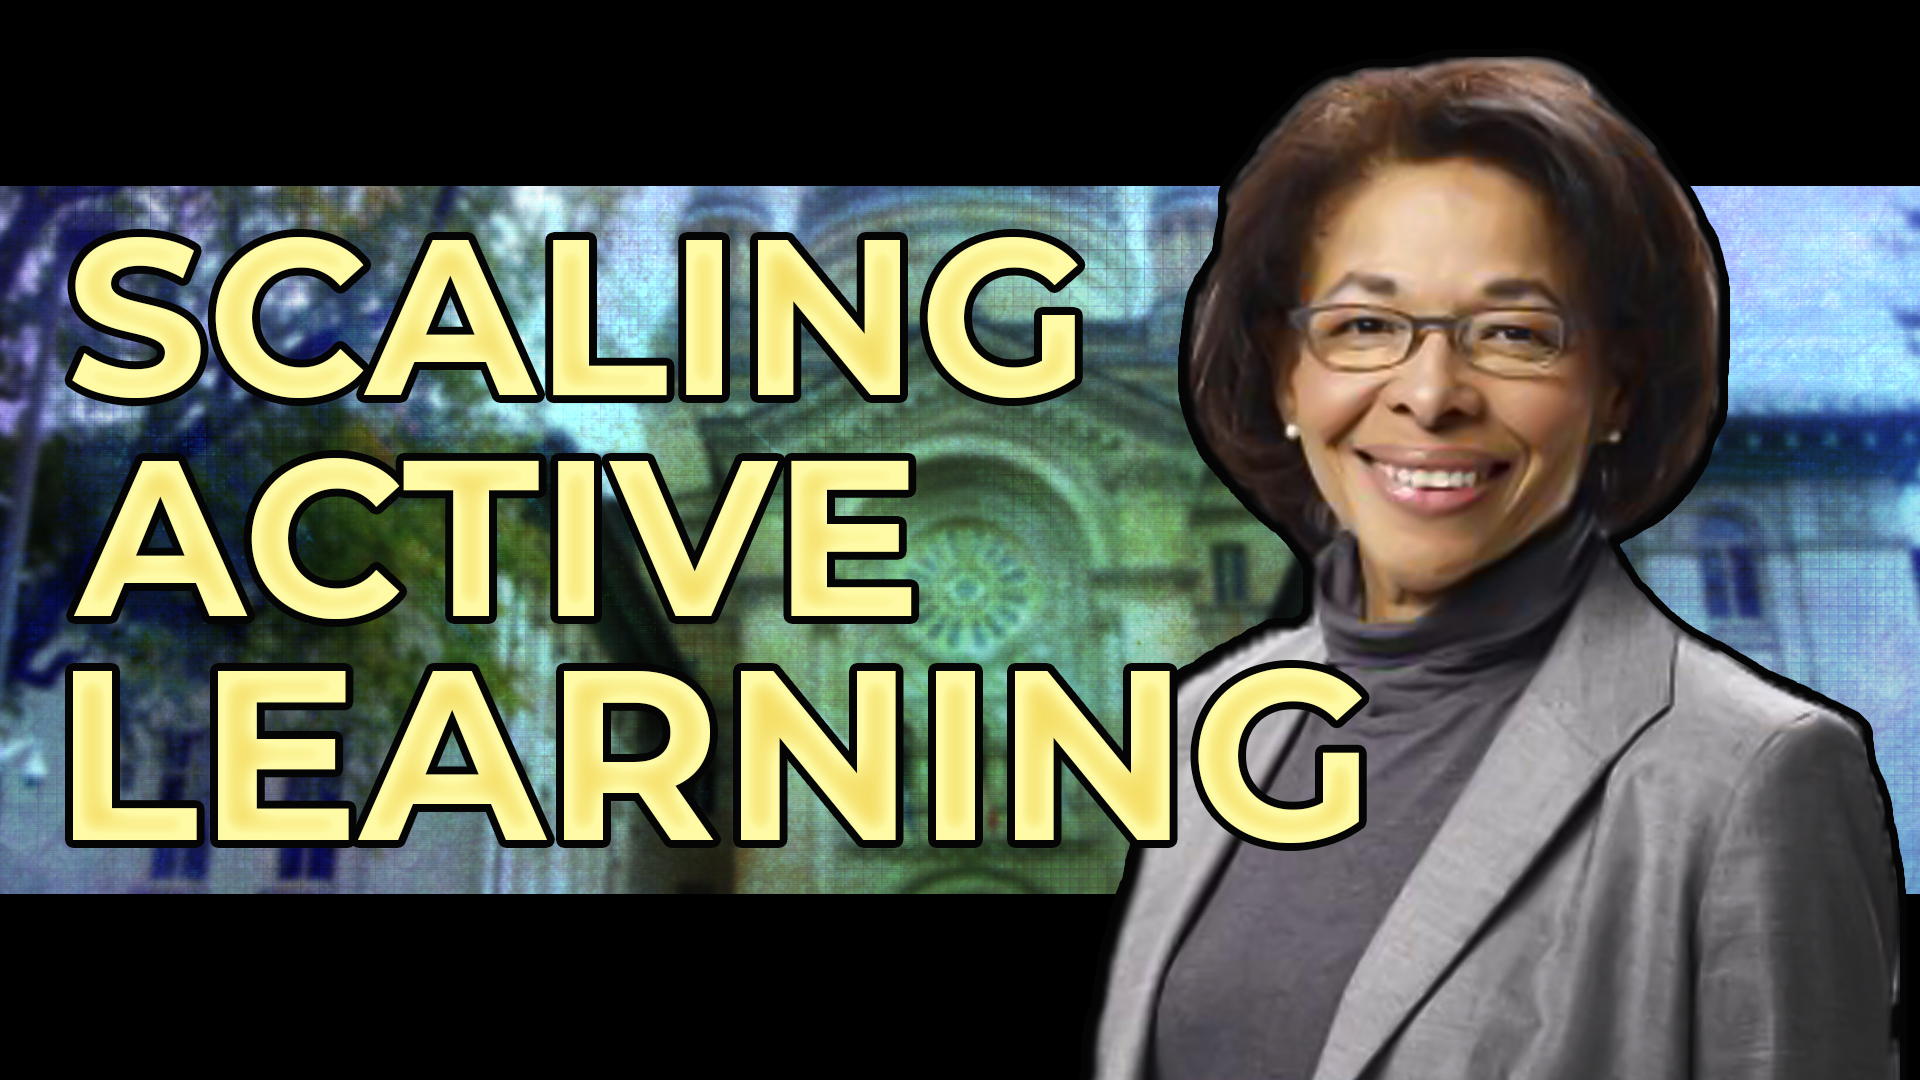 Scaling active learning